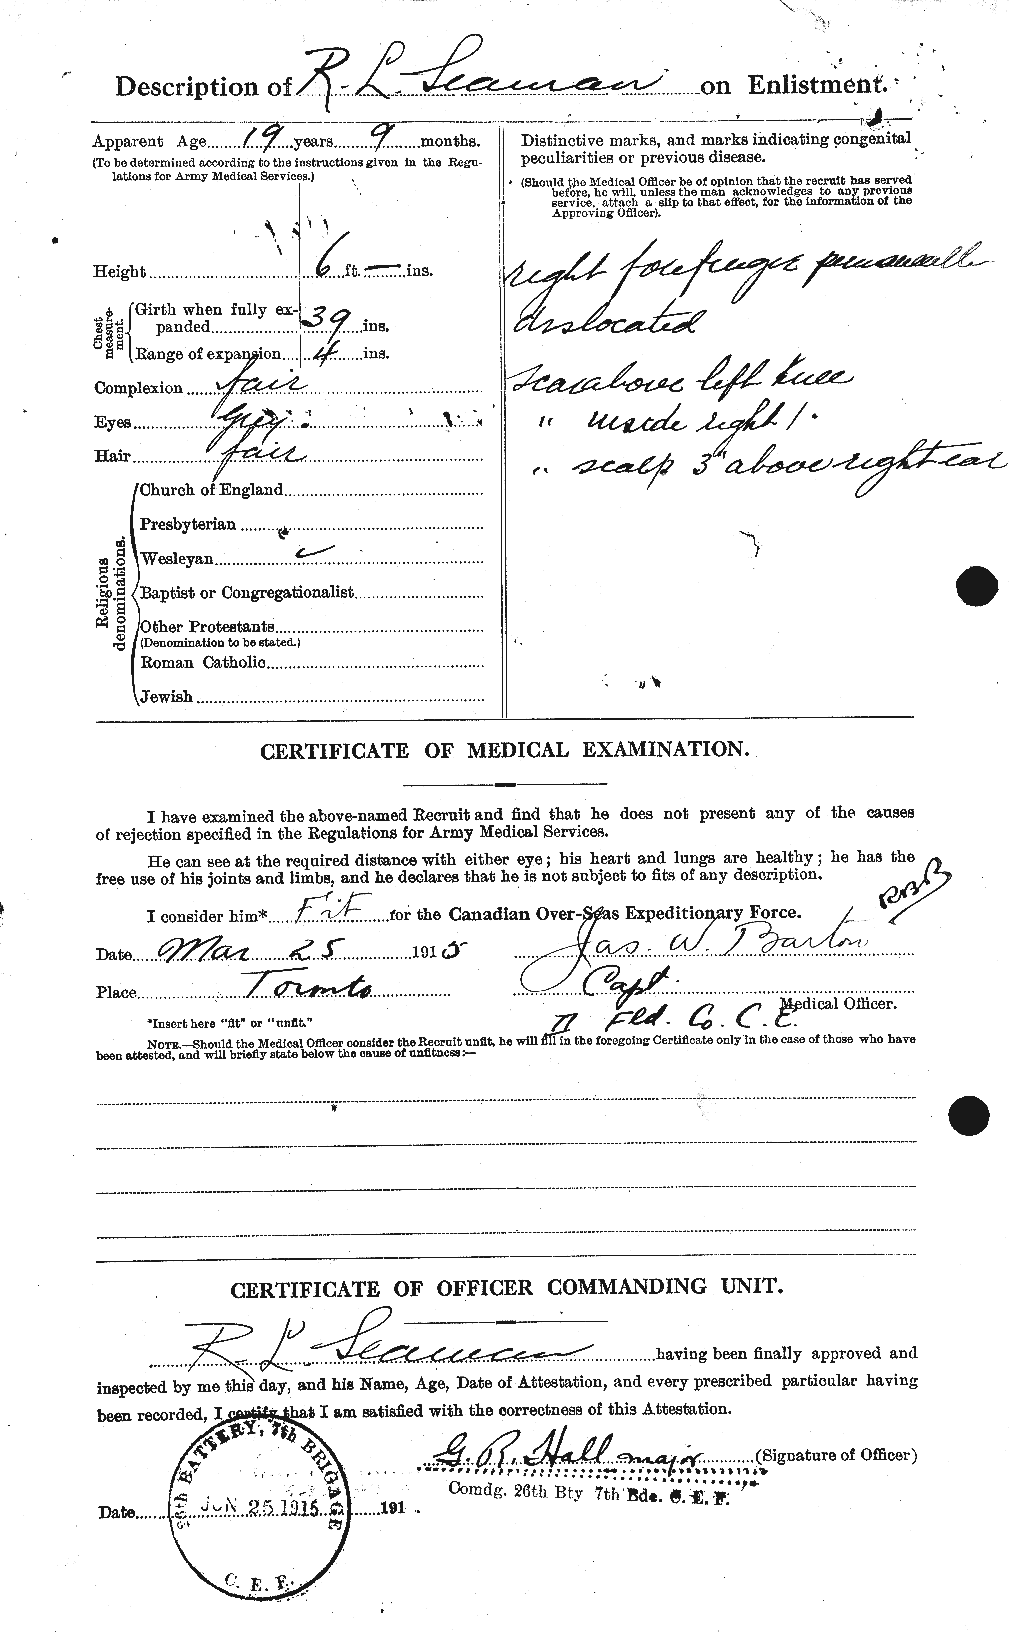 Personnel Records of the First World War - CEF 083981b